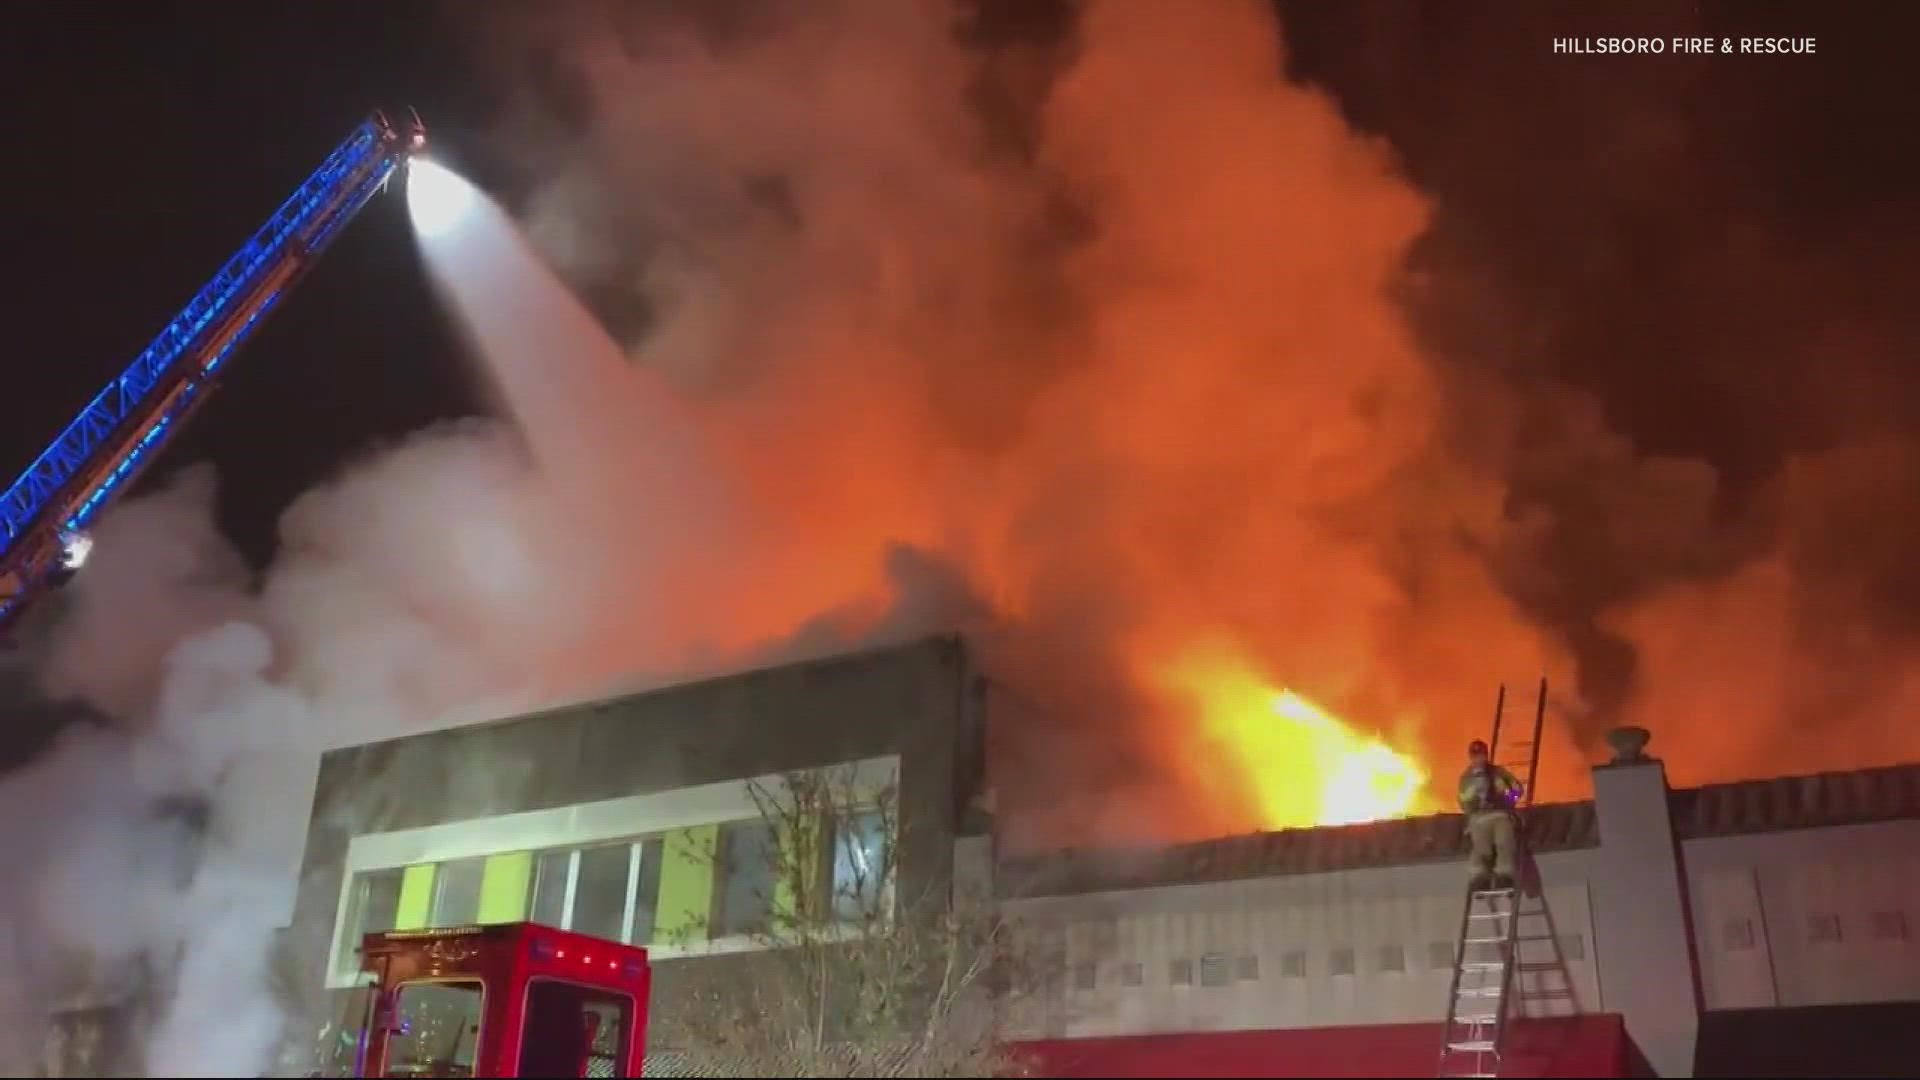 Fire swept through a downtown Hillsboro building and a a nearby apartment building in separate incidents on New Year's weekend